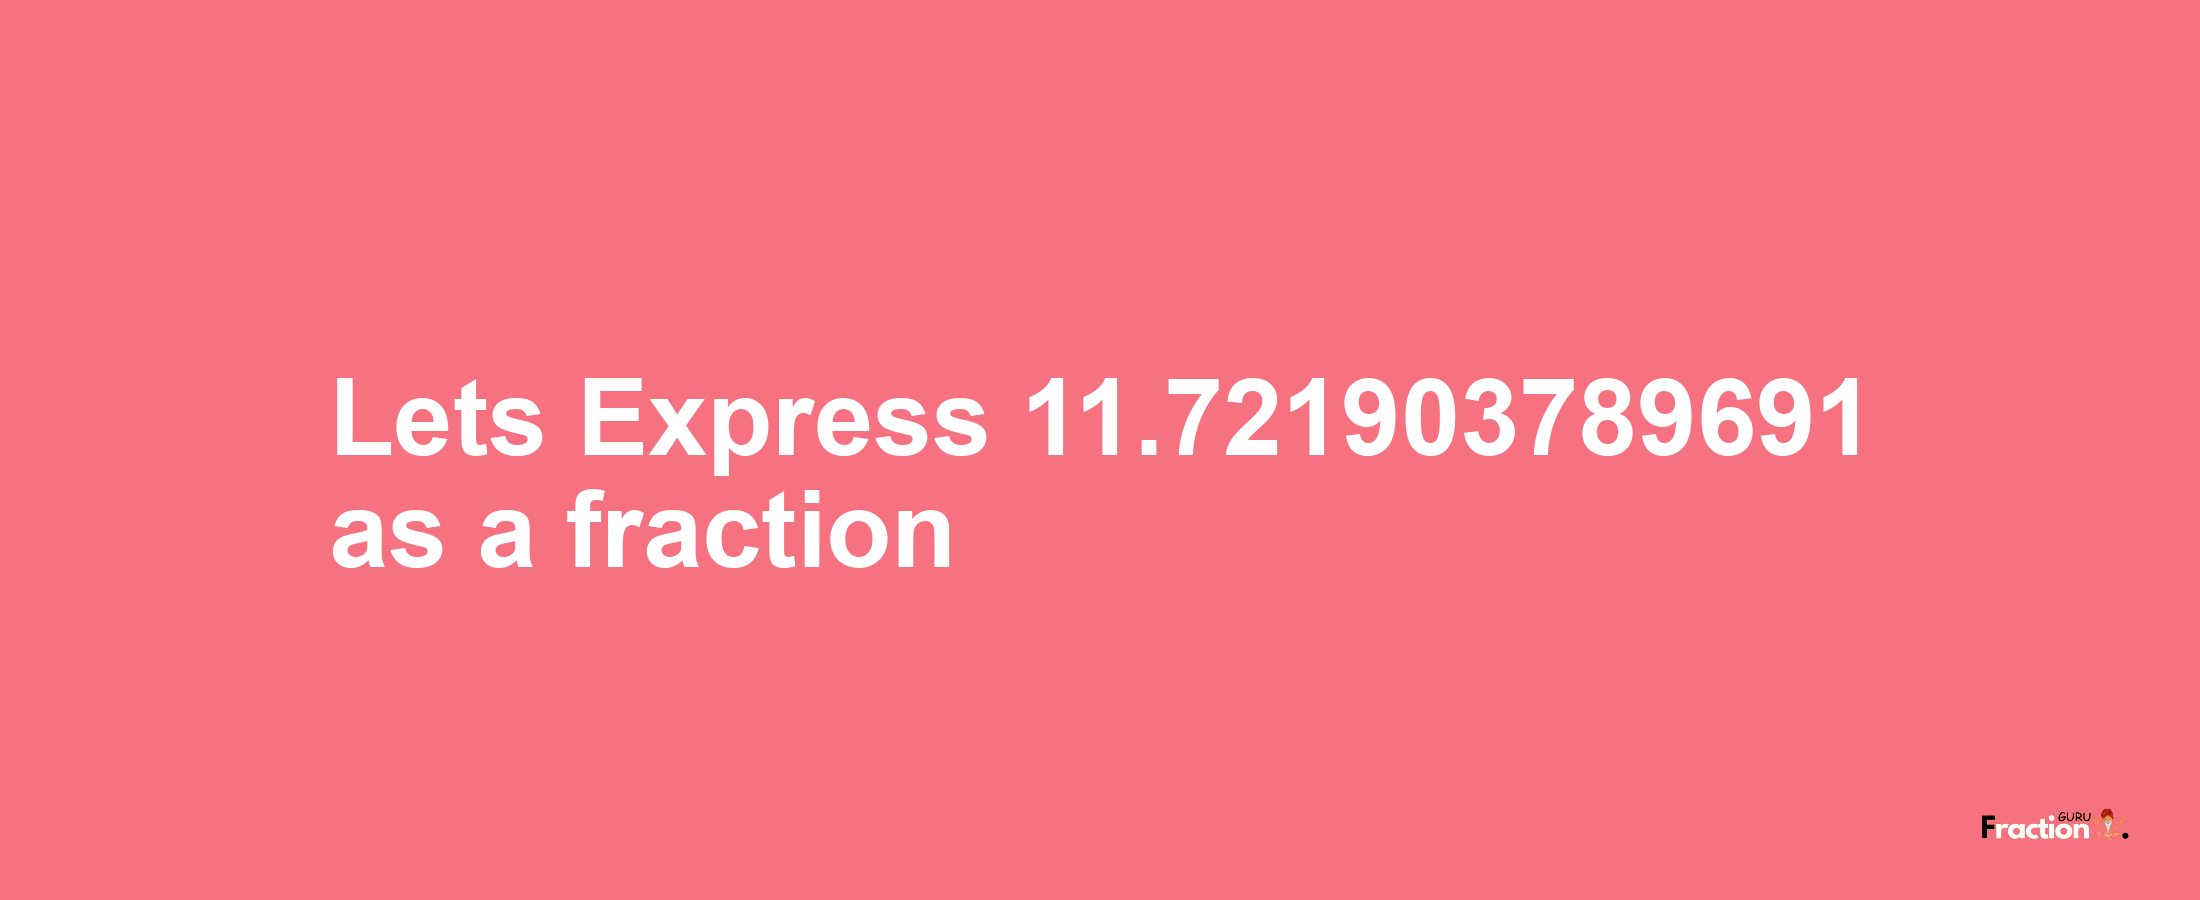 Lets Express 11.721903789691 as afraction